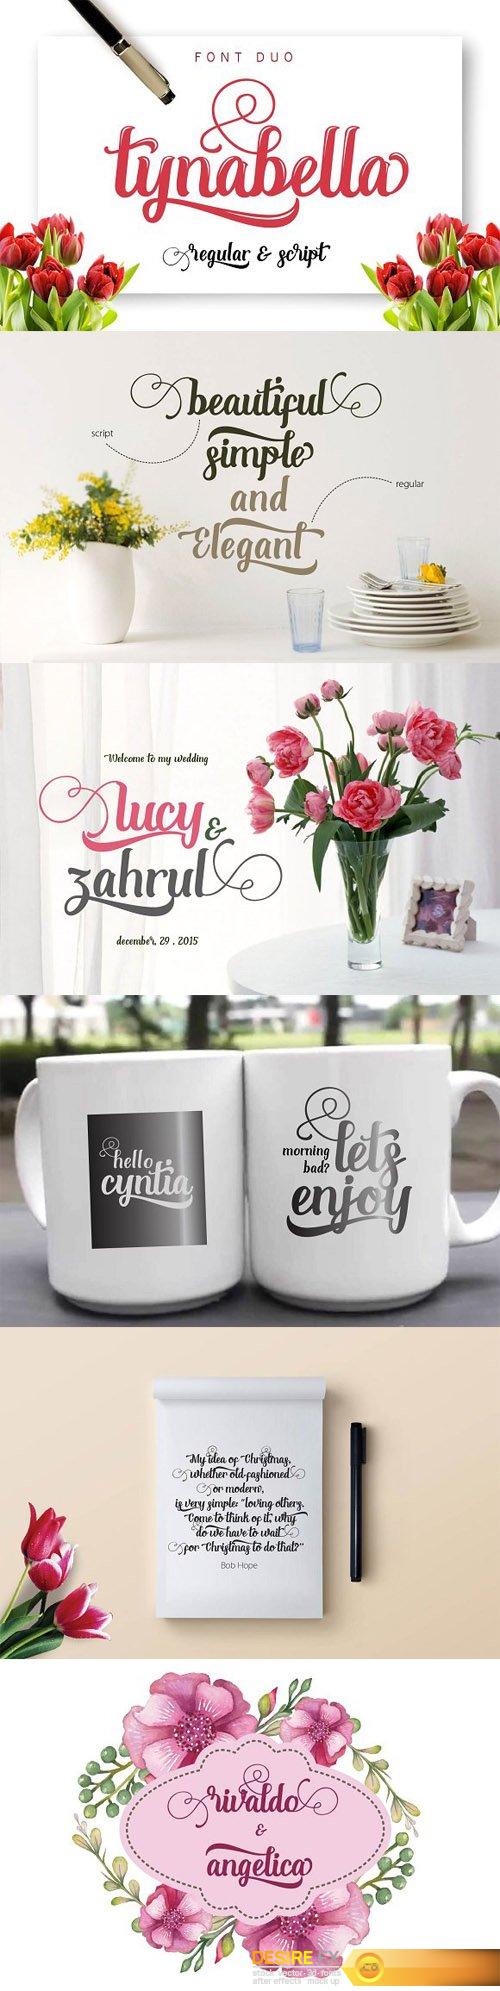 Tynabella Font Duo 458316